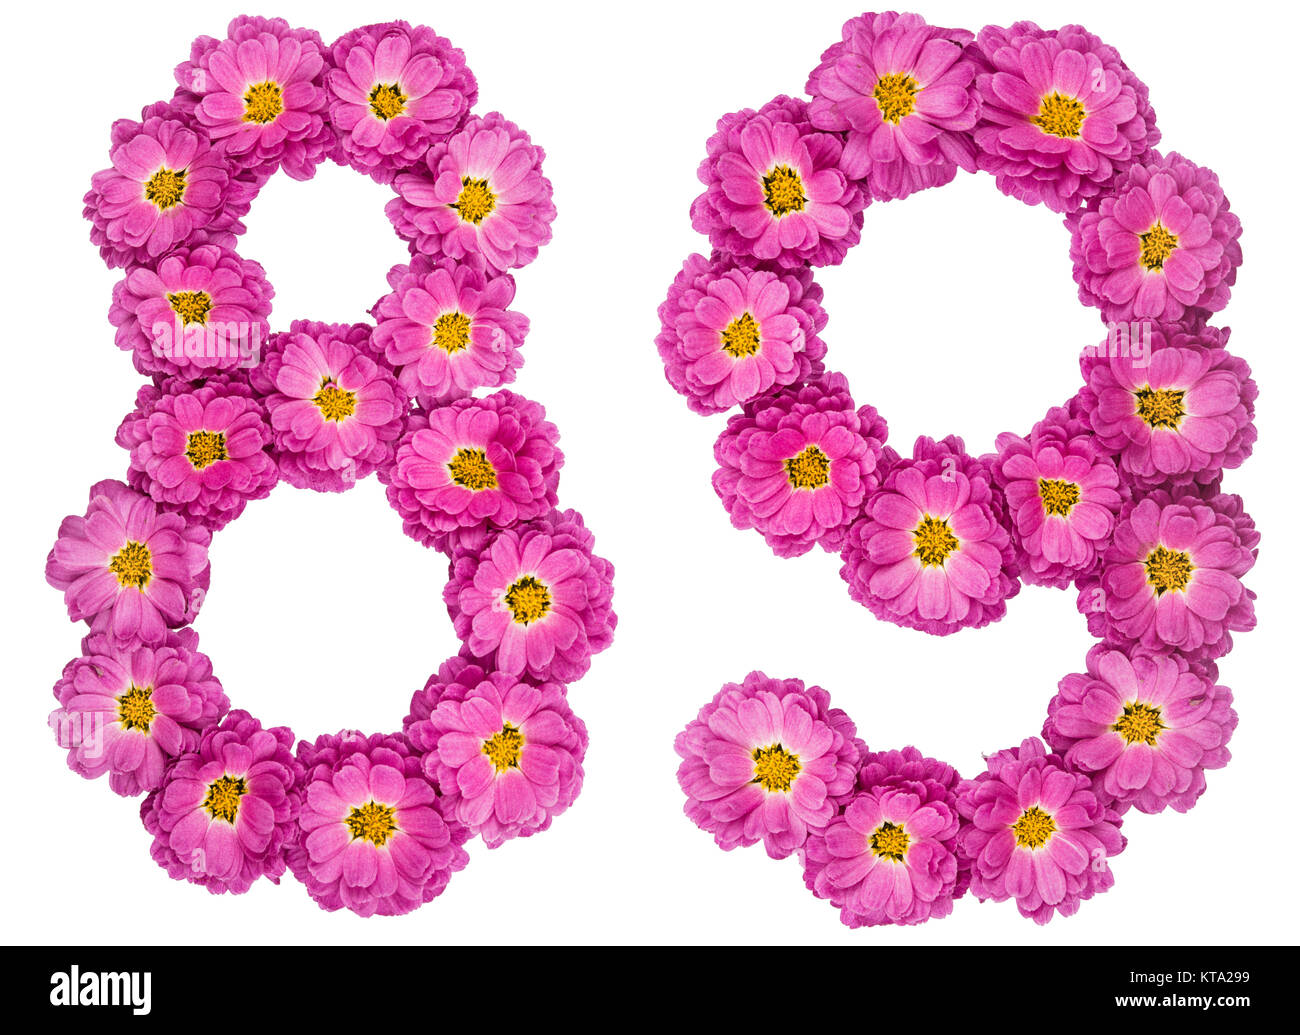 Arabic numeral 89, eighty nine, from flowers of chrysanthemum, isolated on white background Stock Photo